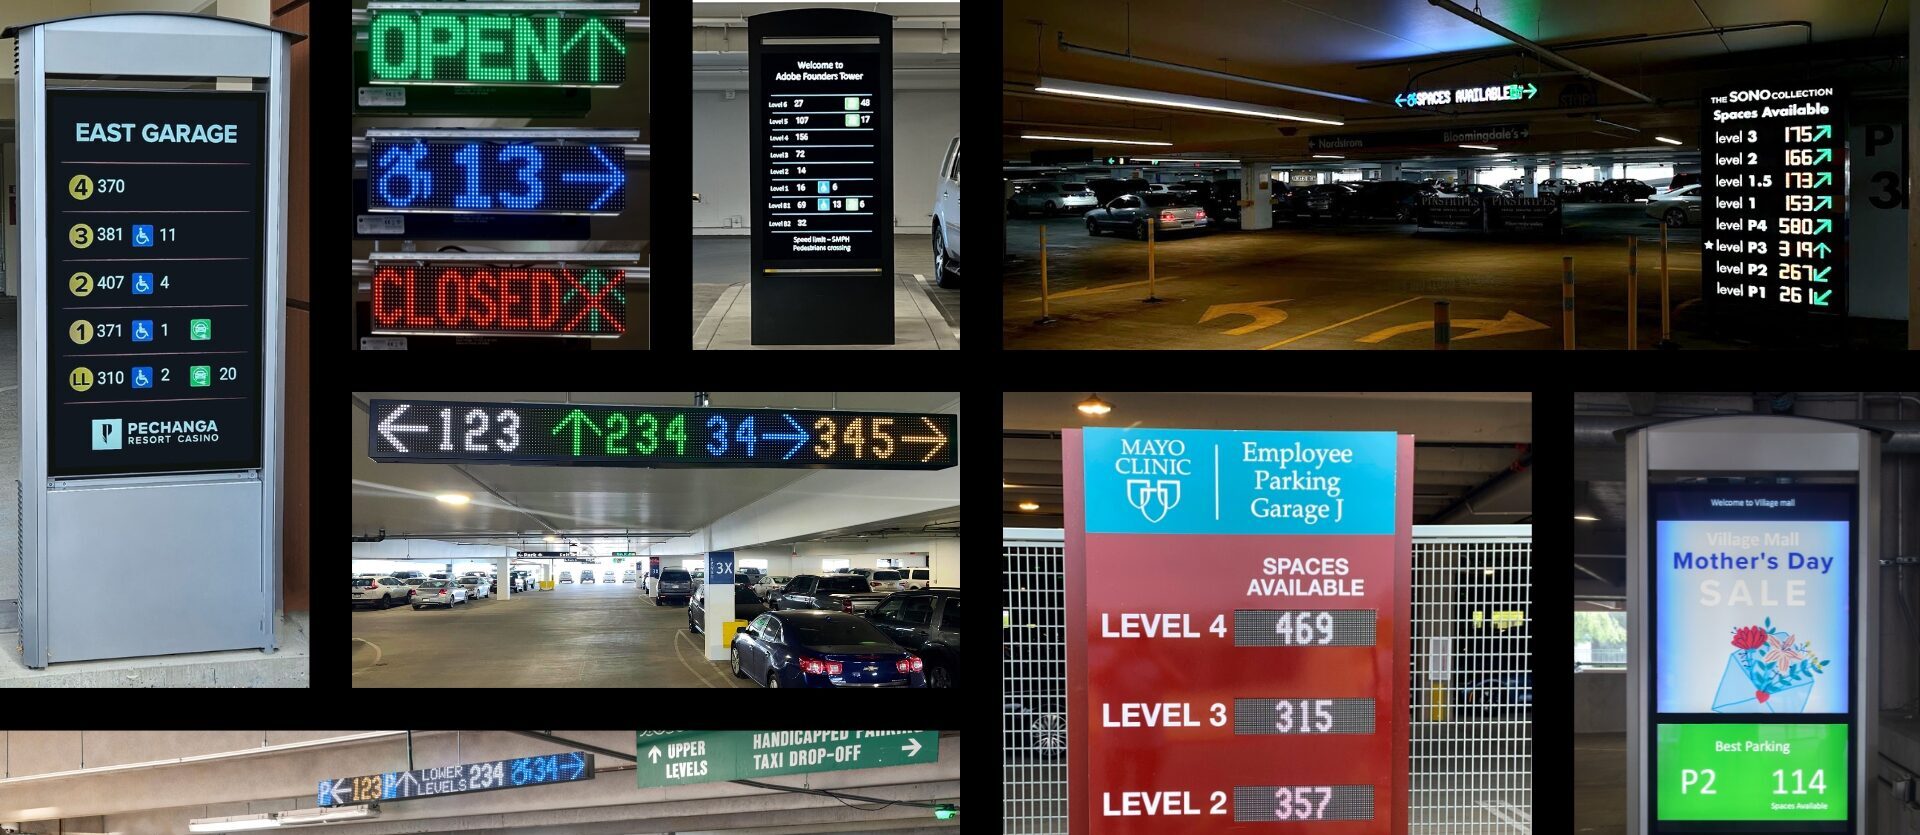 With our automated parking guidance system, real-time digital wayfinding signage options help customers park faster